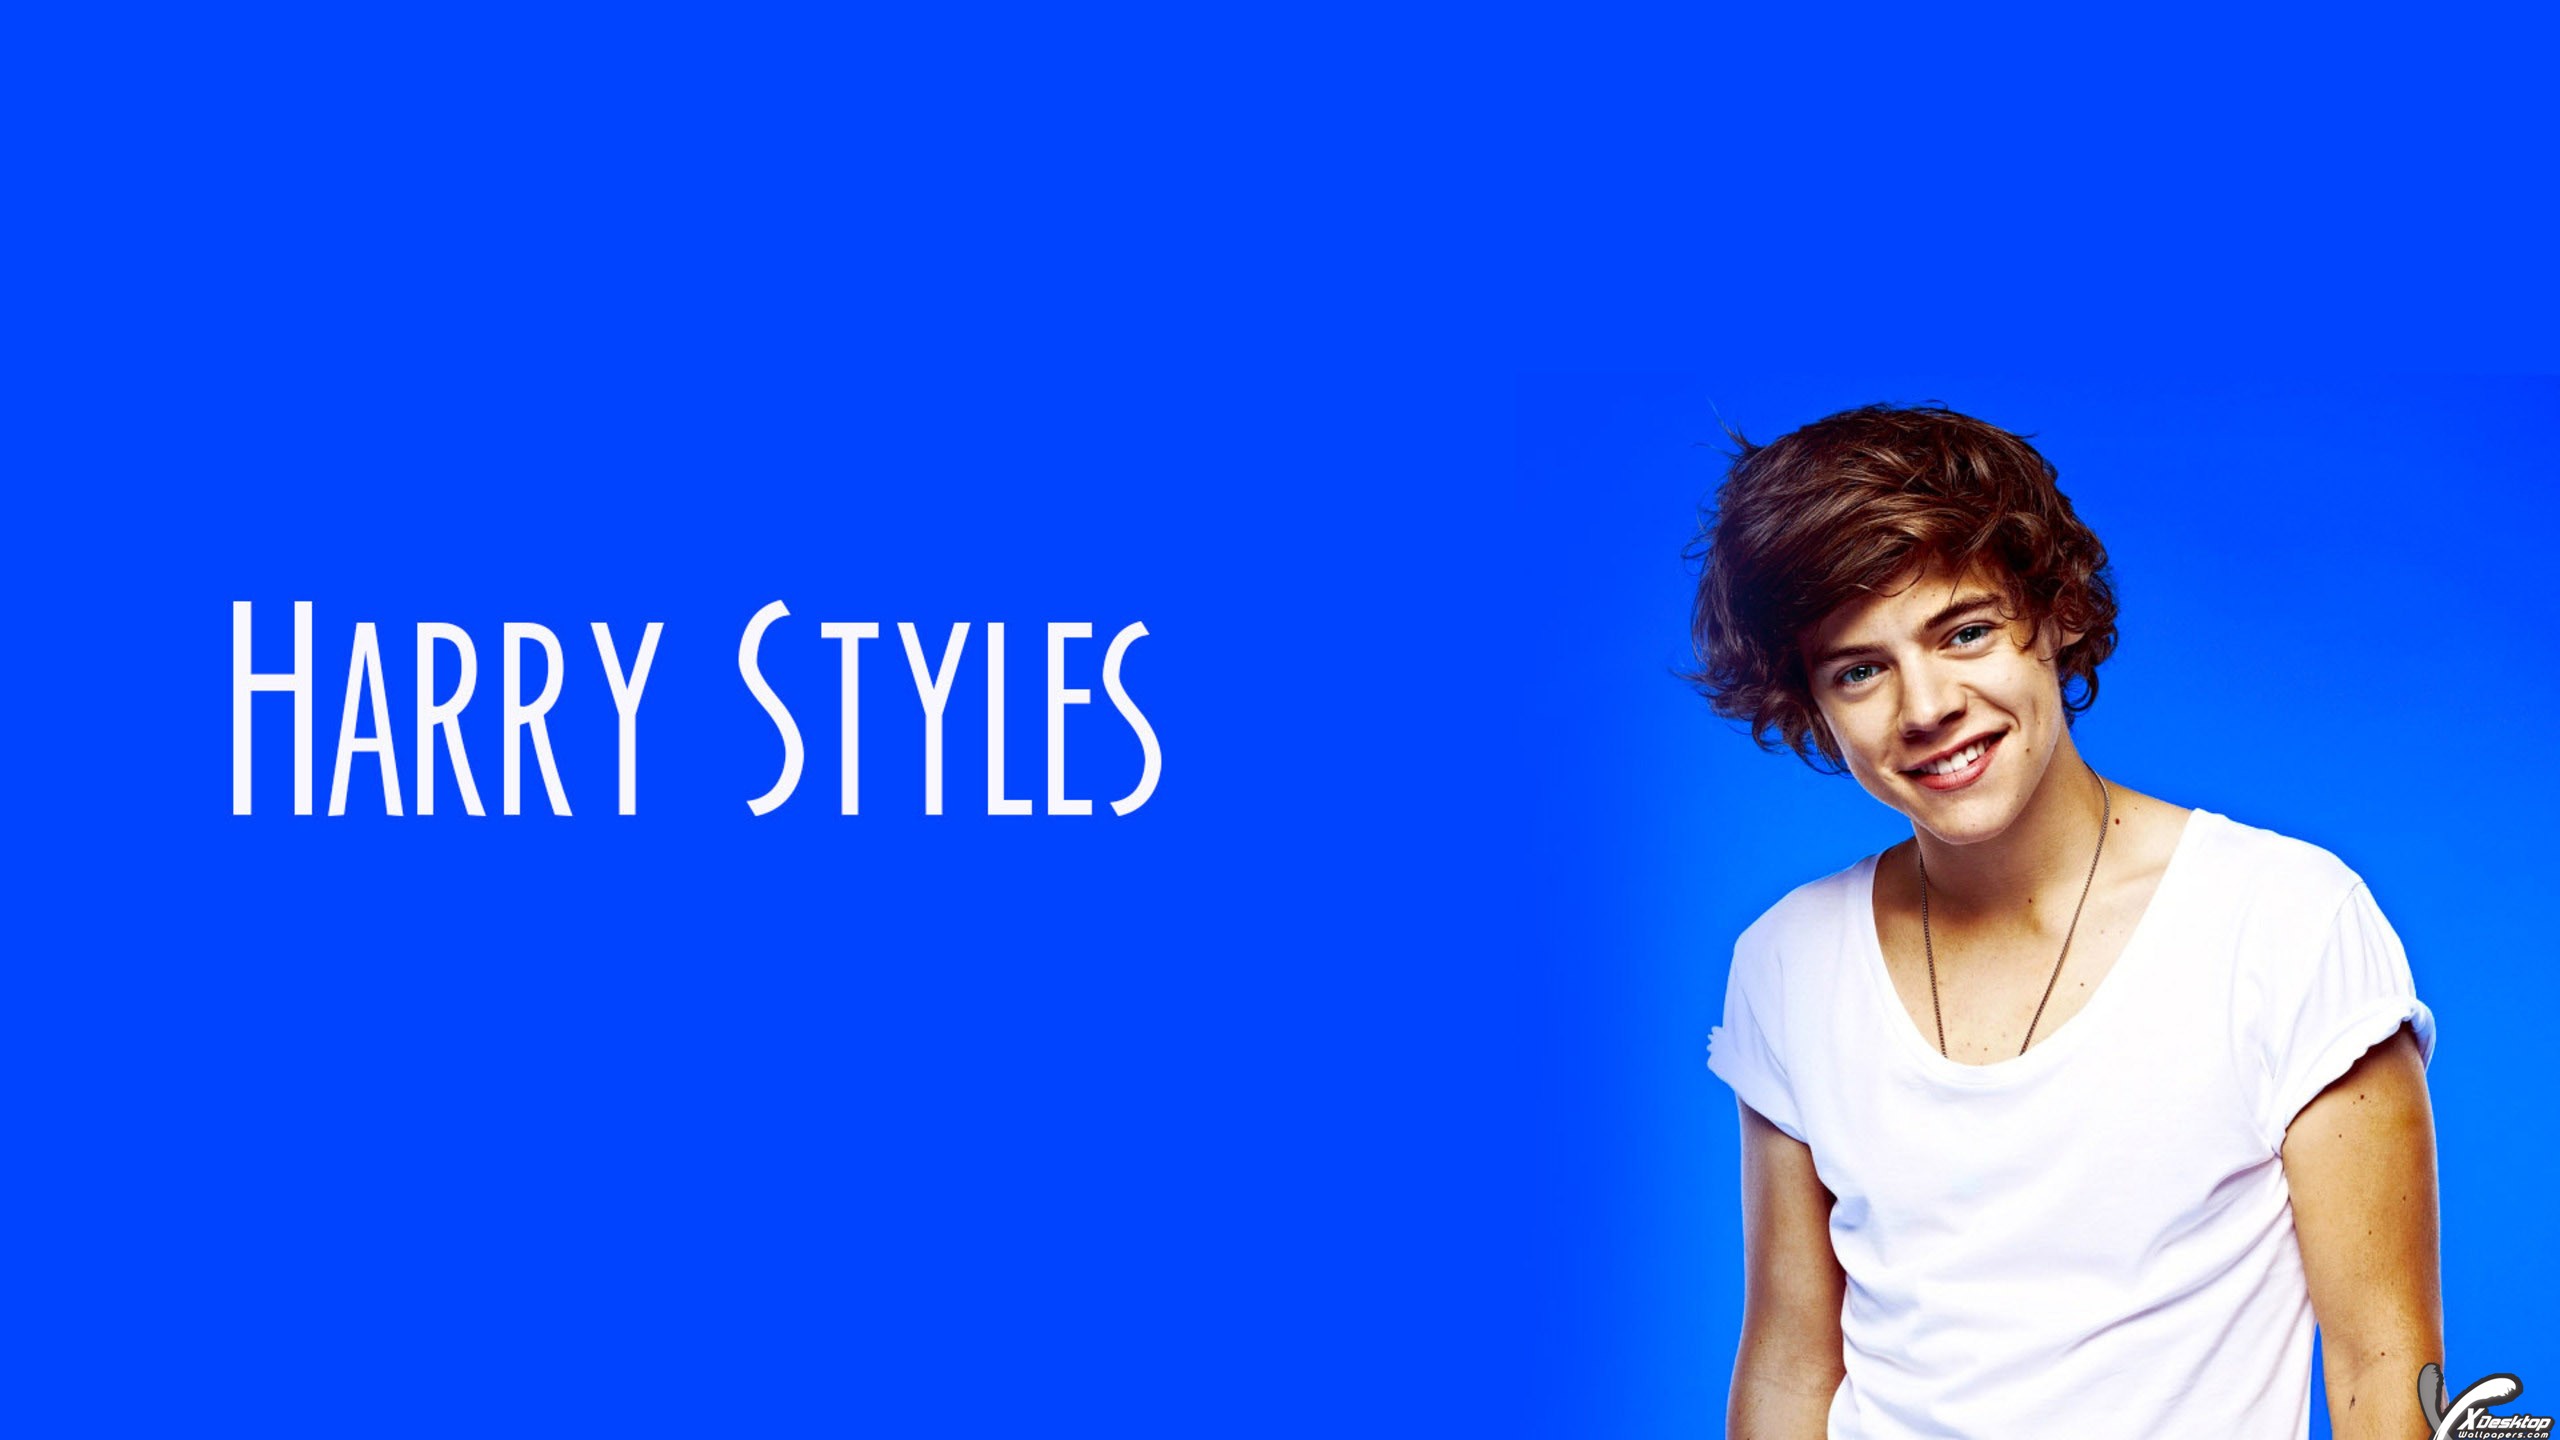 Harry Styles Wallpapers Photos Images in HD